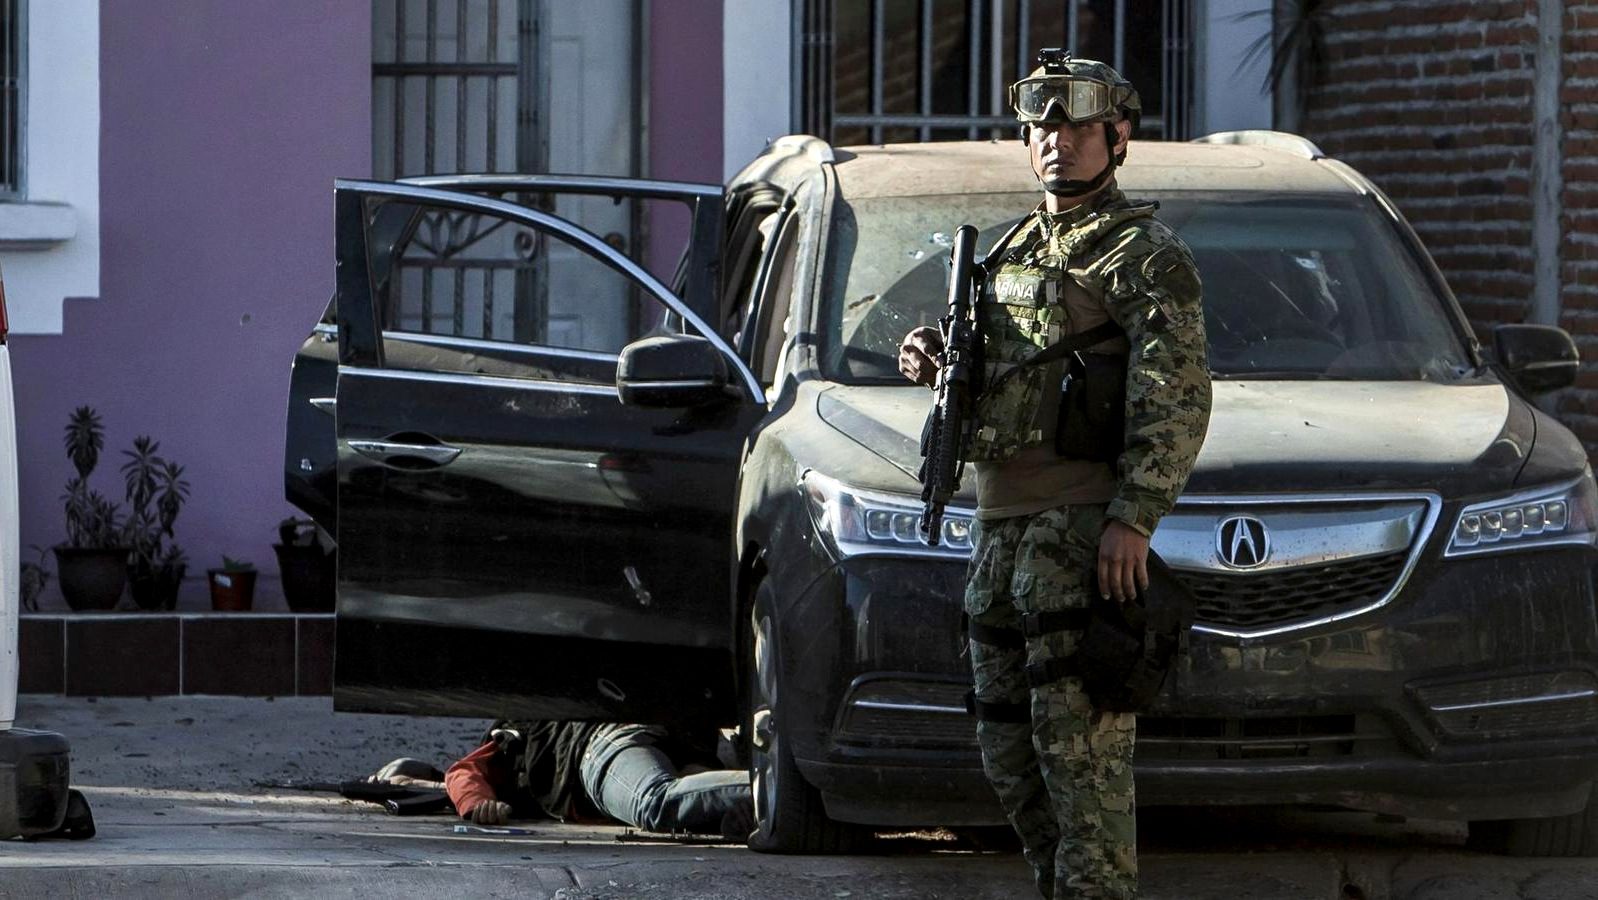 A Mexican marine stands by the body of a gunman after shots were exchanged in the city of Culiacan on Feb. 7, 2017. The Sinaloa state prosecutor's office said the men attacked the marines, leaving one of them dead. (Rashide Frias/Associated Press)